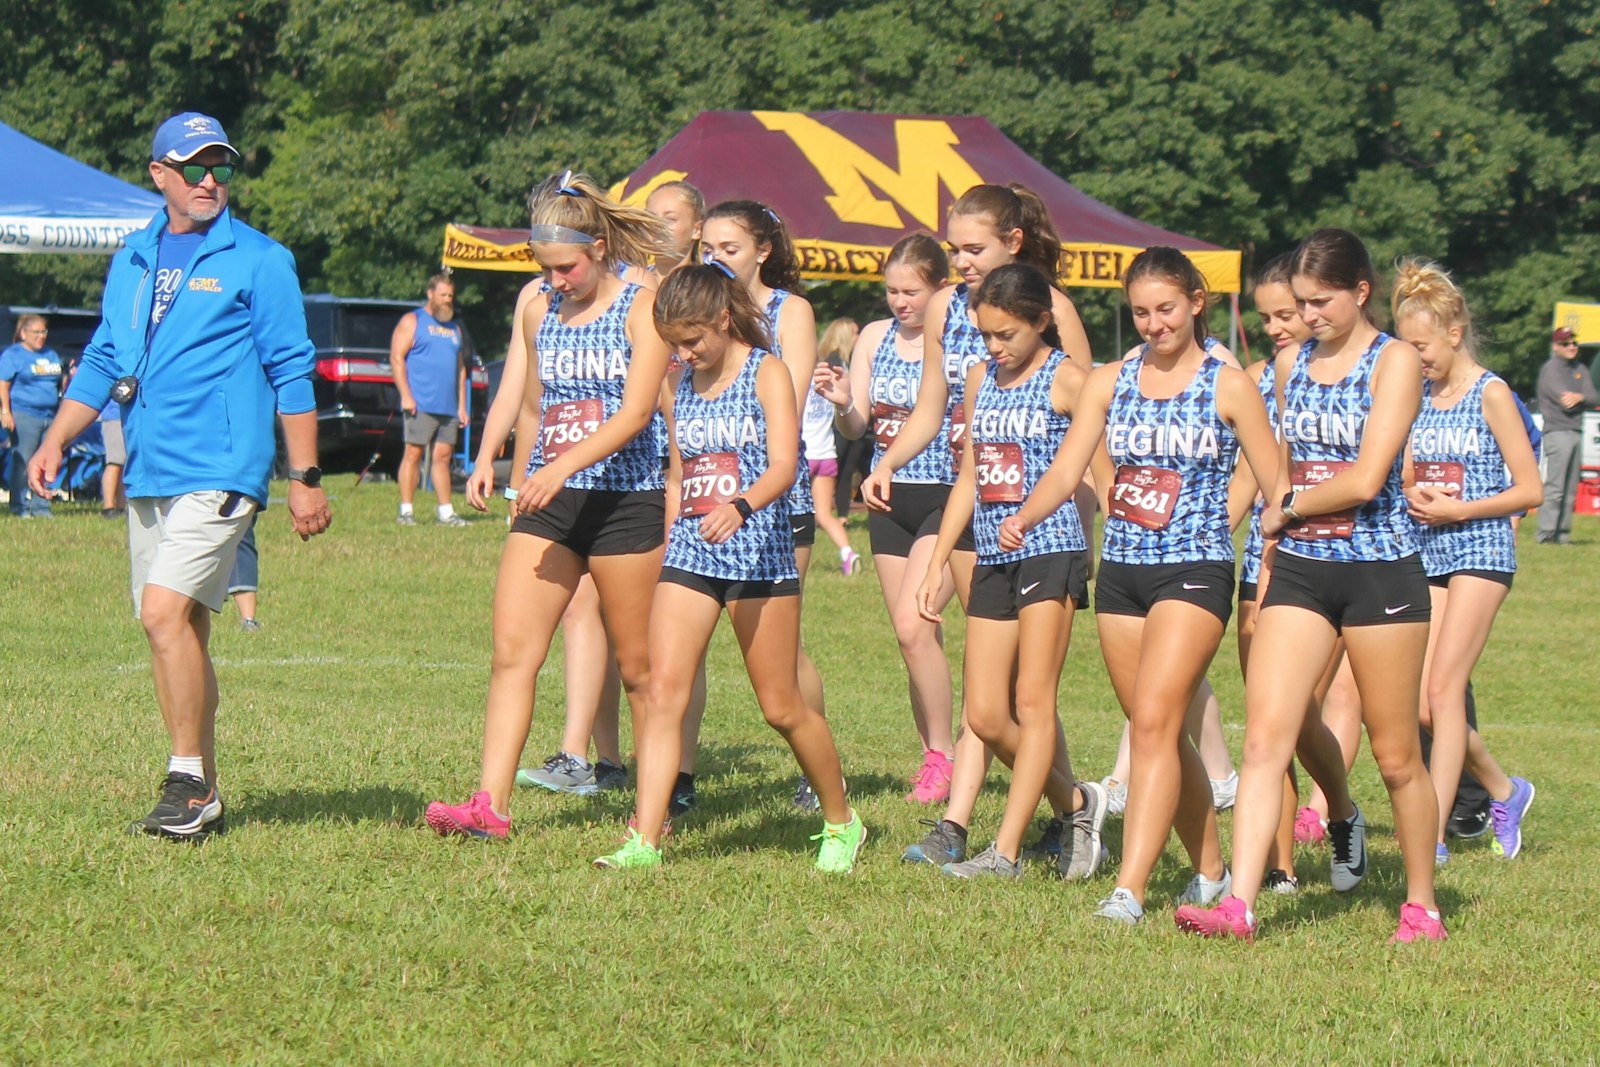 Veteran coach Gregg Golden leads his Warren Regina team to the starting line shortly before the start of the race at Hess-Hathaway Park in Waterford Township on Sept. 13. Senior Kennedy Roskopp said the Saddlelites’ main goal this season is to qualify for the state finals and improve their standing from 2022.